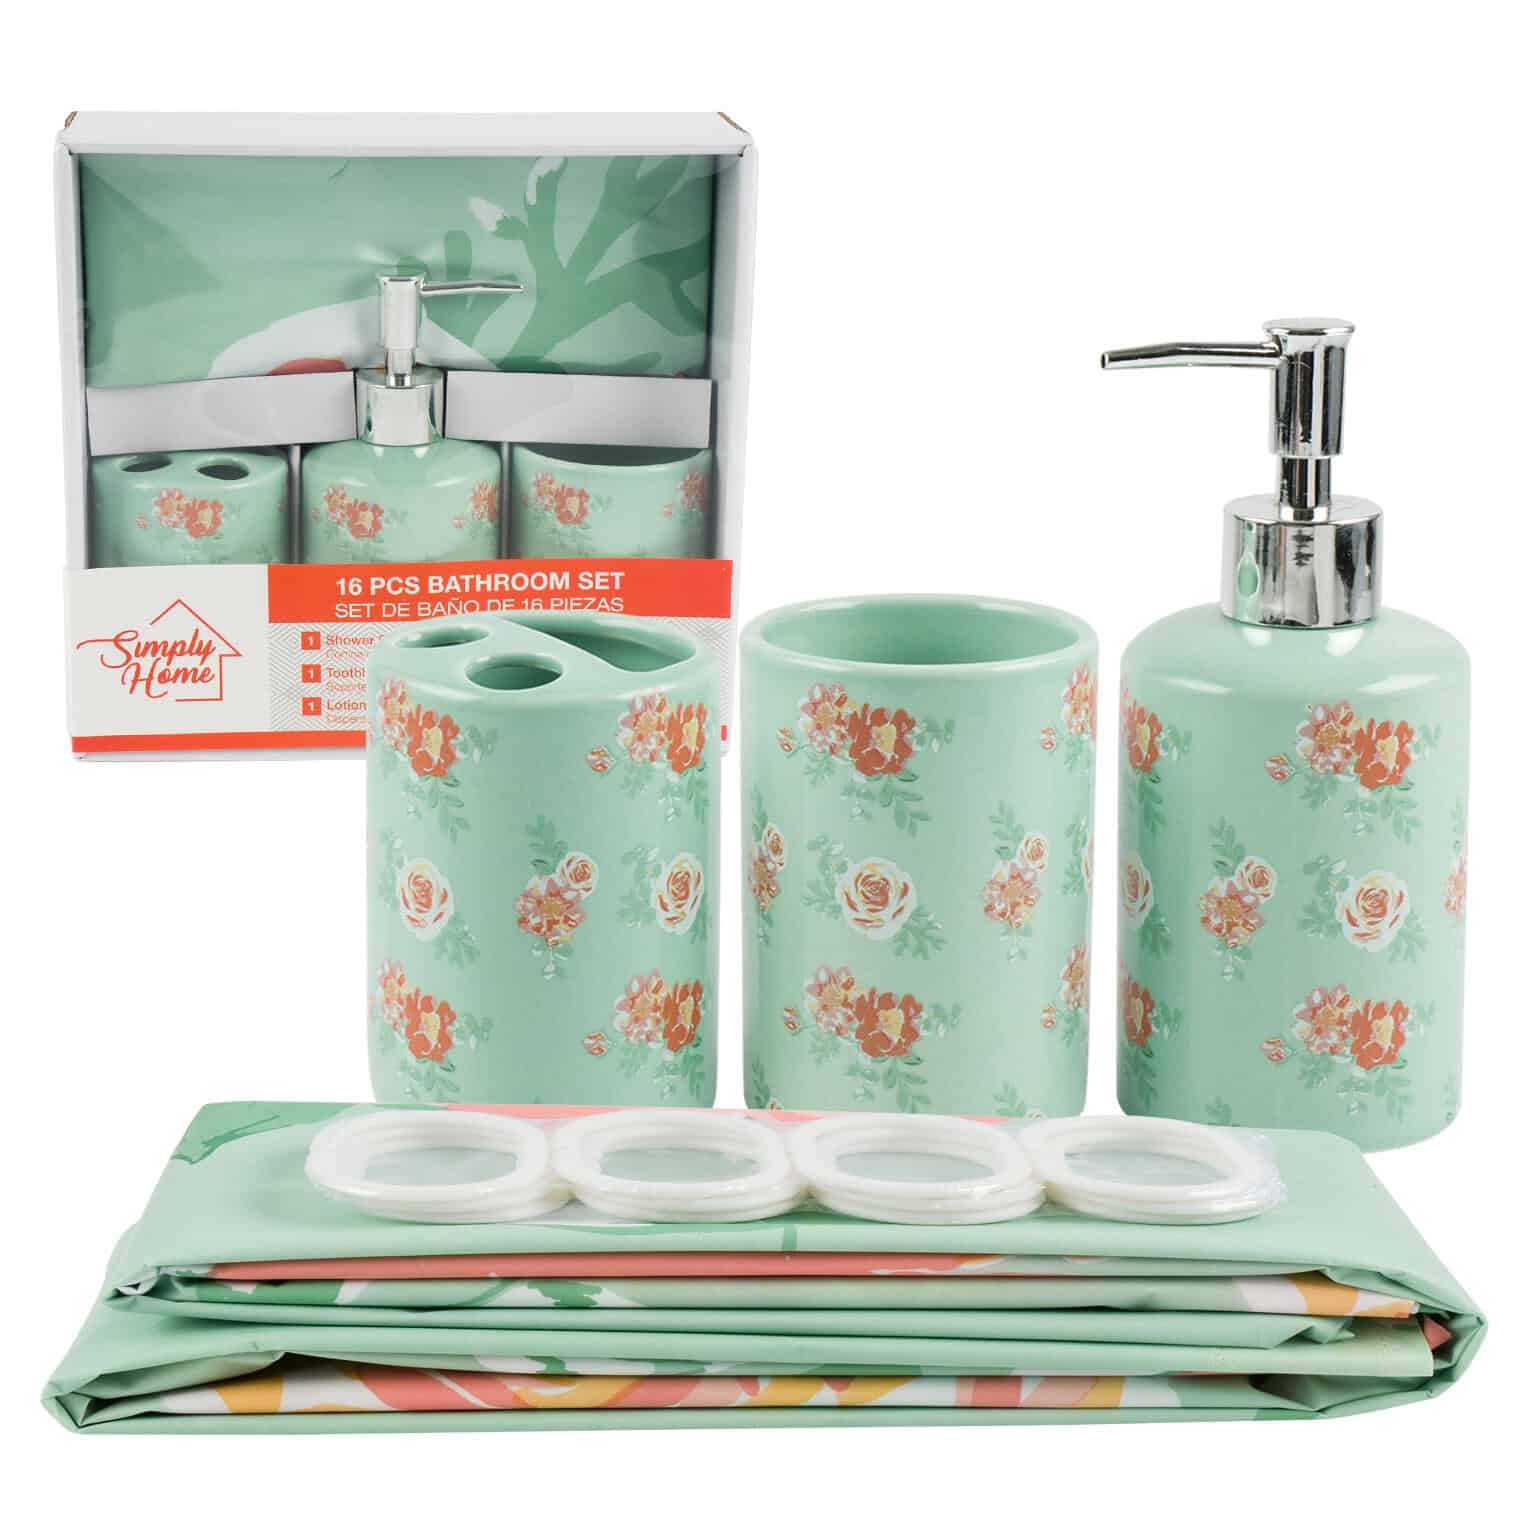 This Rose Bathroom Set Design Toothbrush Holder Soap Dispenser Shower Curtain is made with love by Premier Homegoods! Shop more unique gift ideas today with Spots Initiatives, the best way to support creators.